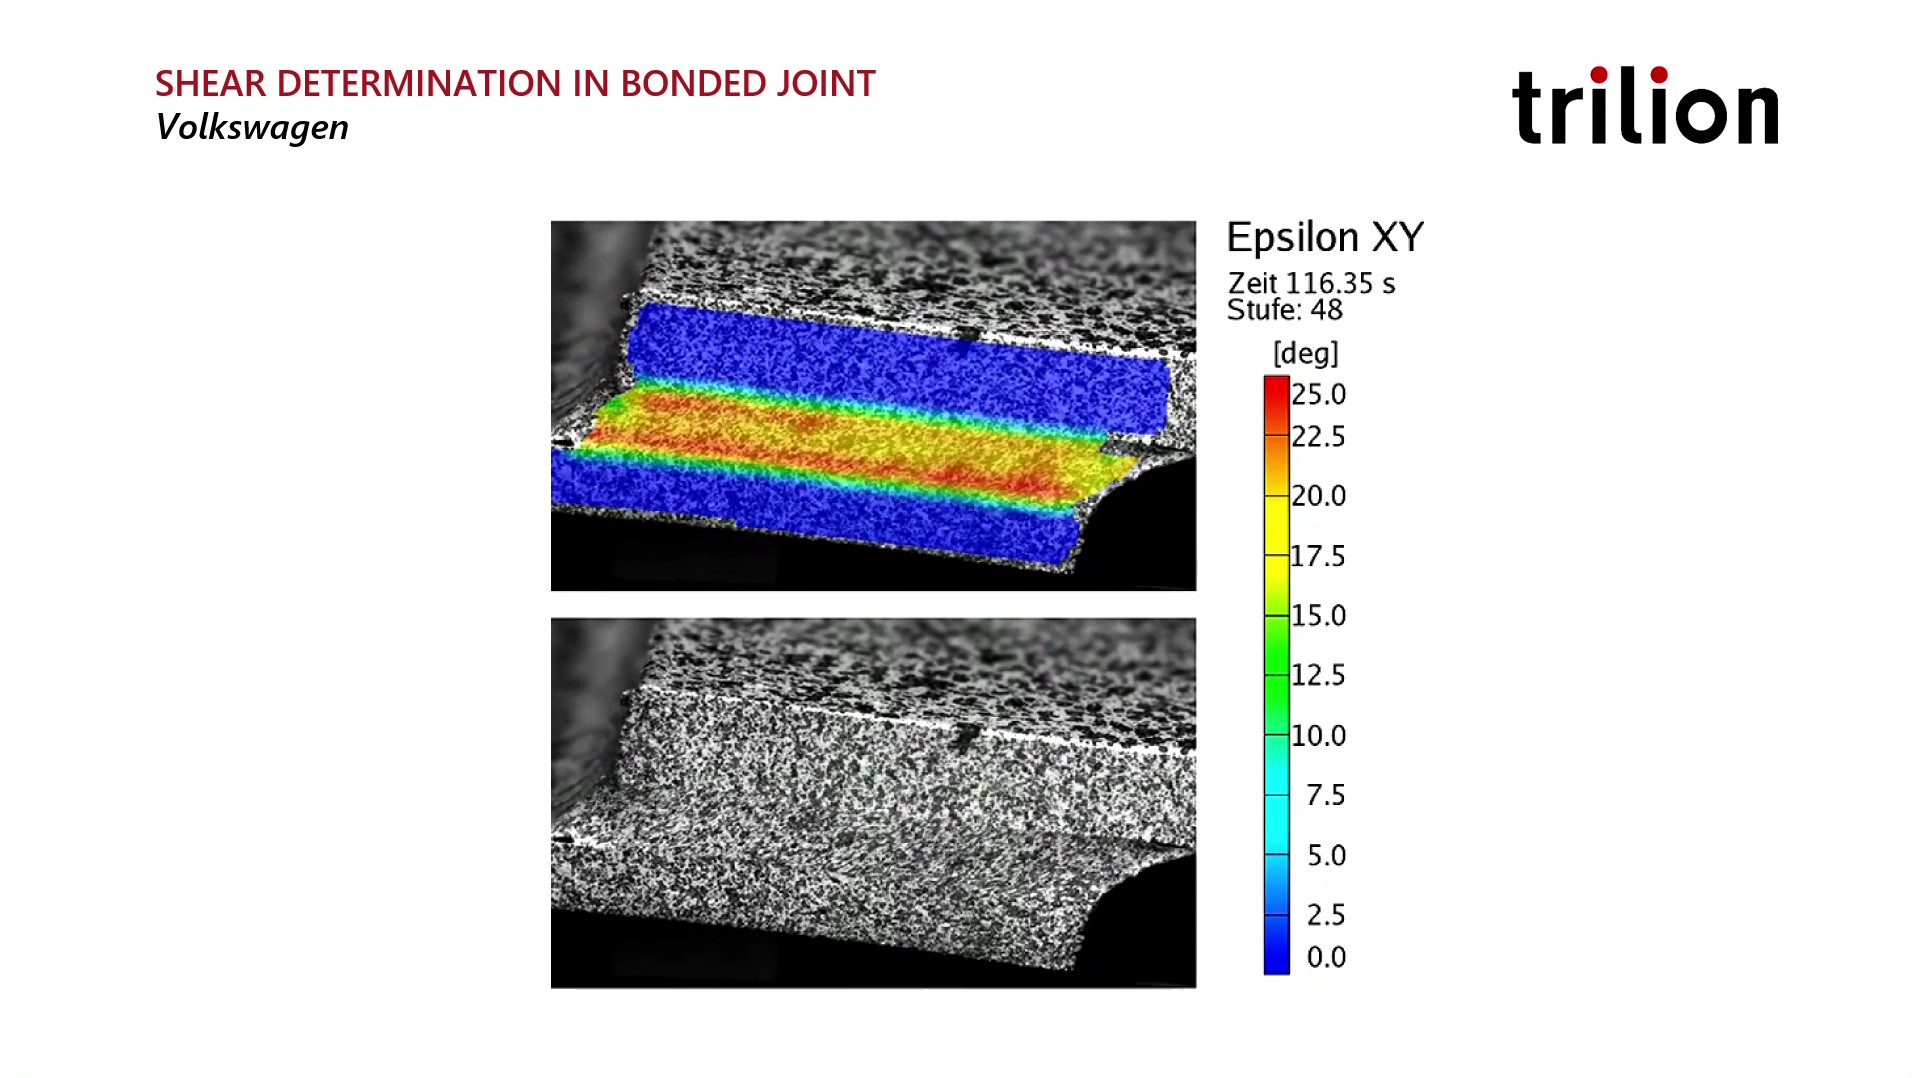 Using ARAMIS DIC System to detect the Shear Determination in Bonded Joint